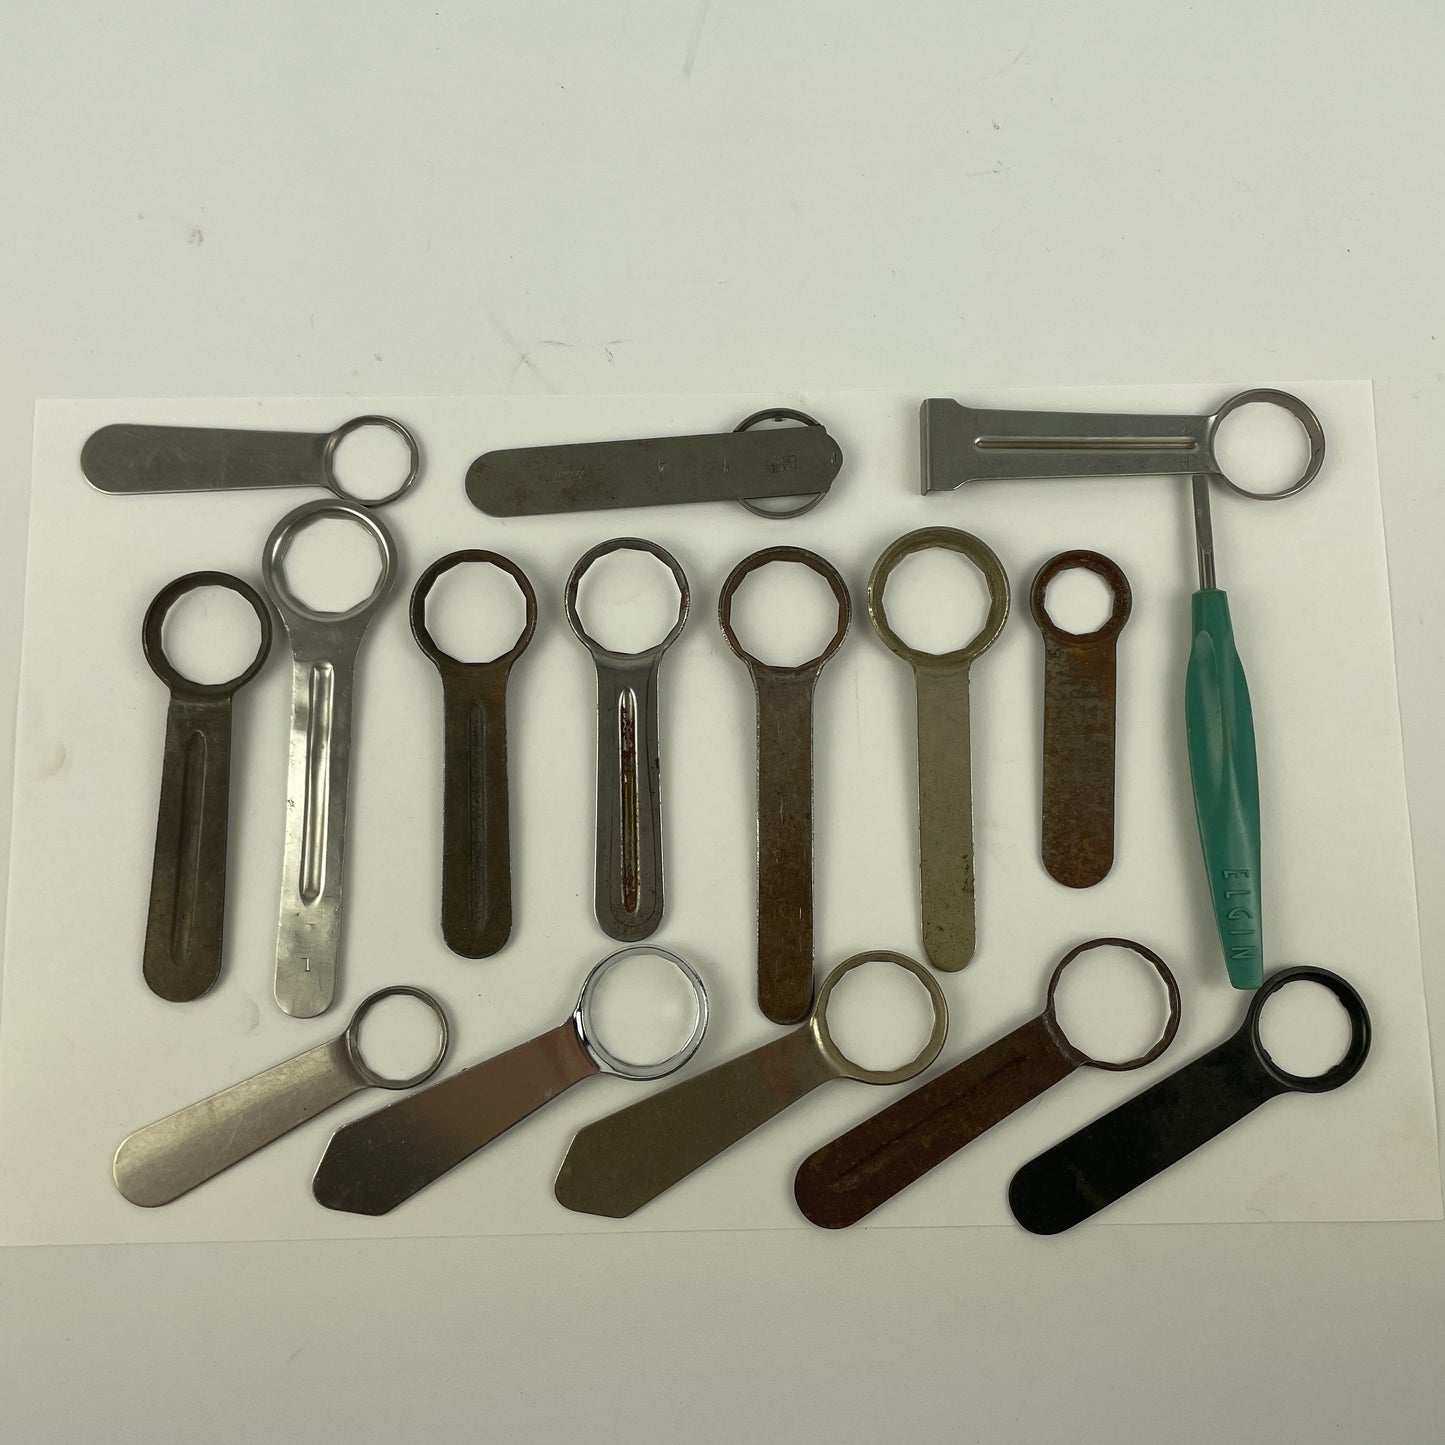 Jan Lot 16- Watchmaker’s Selection of Handheld Waterproof Case Wrenches